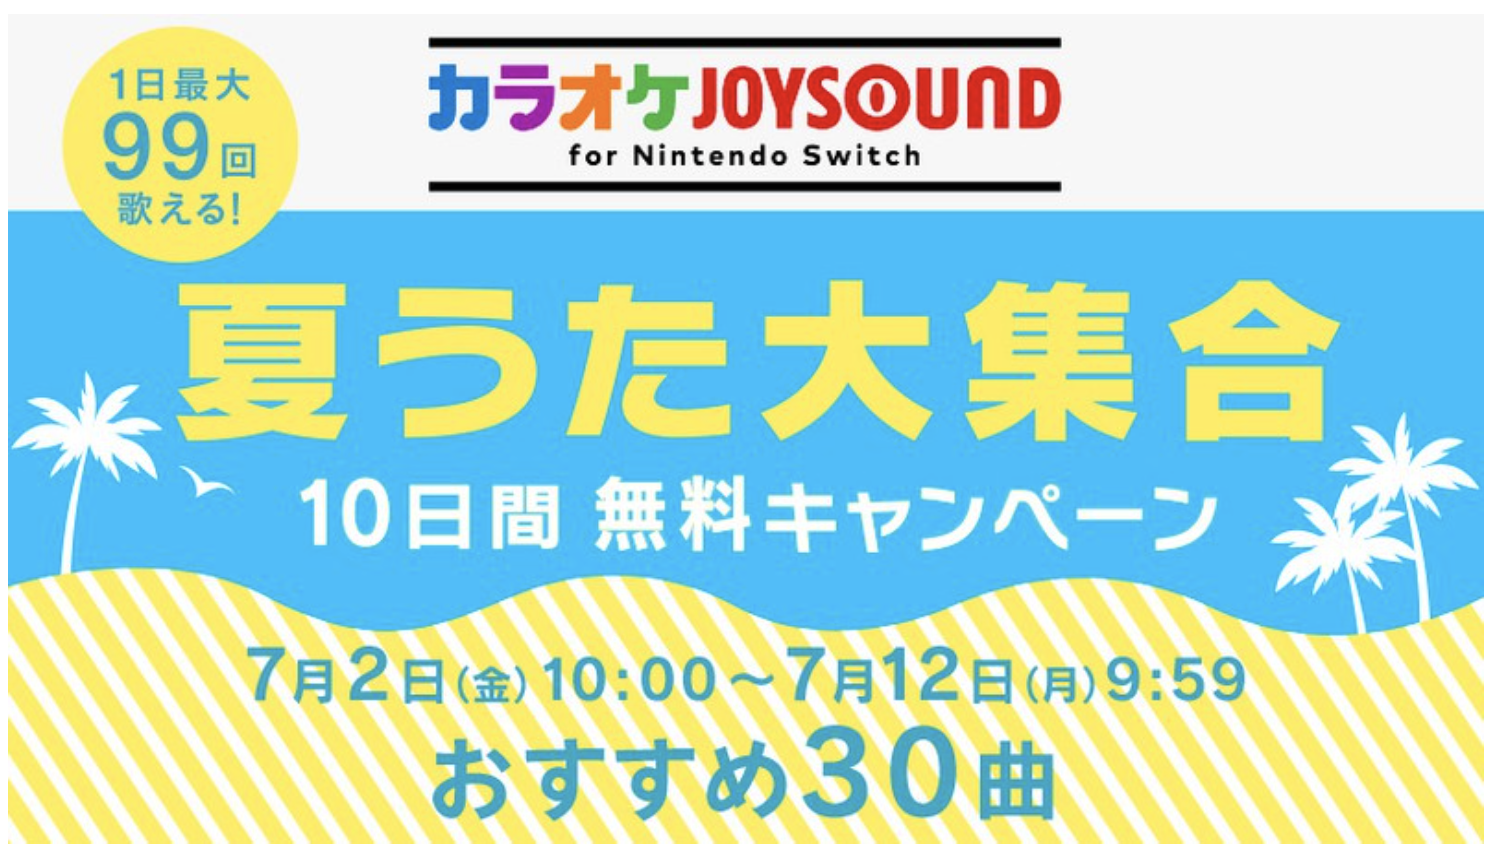 More Free Karaoke for Nintendo Switch in Japan This July